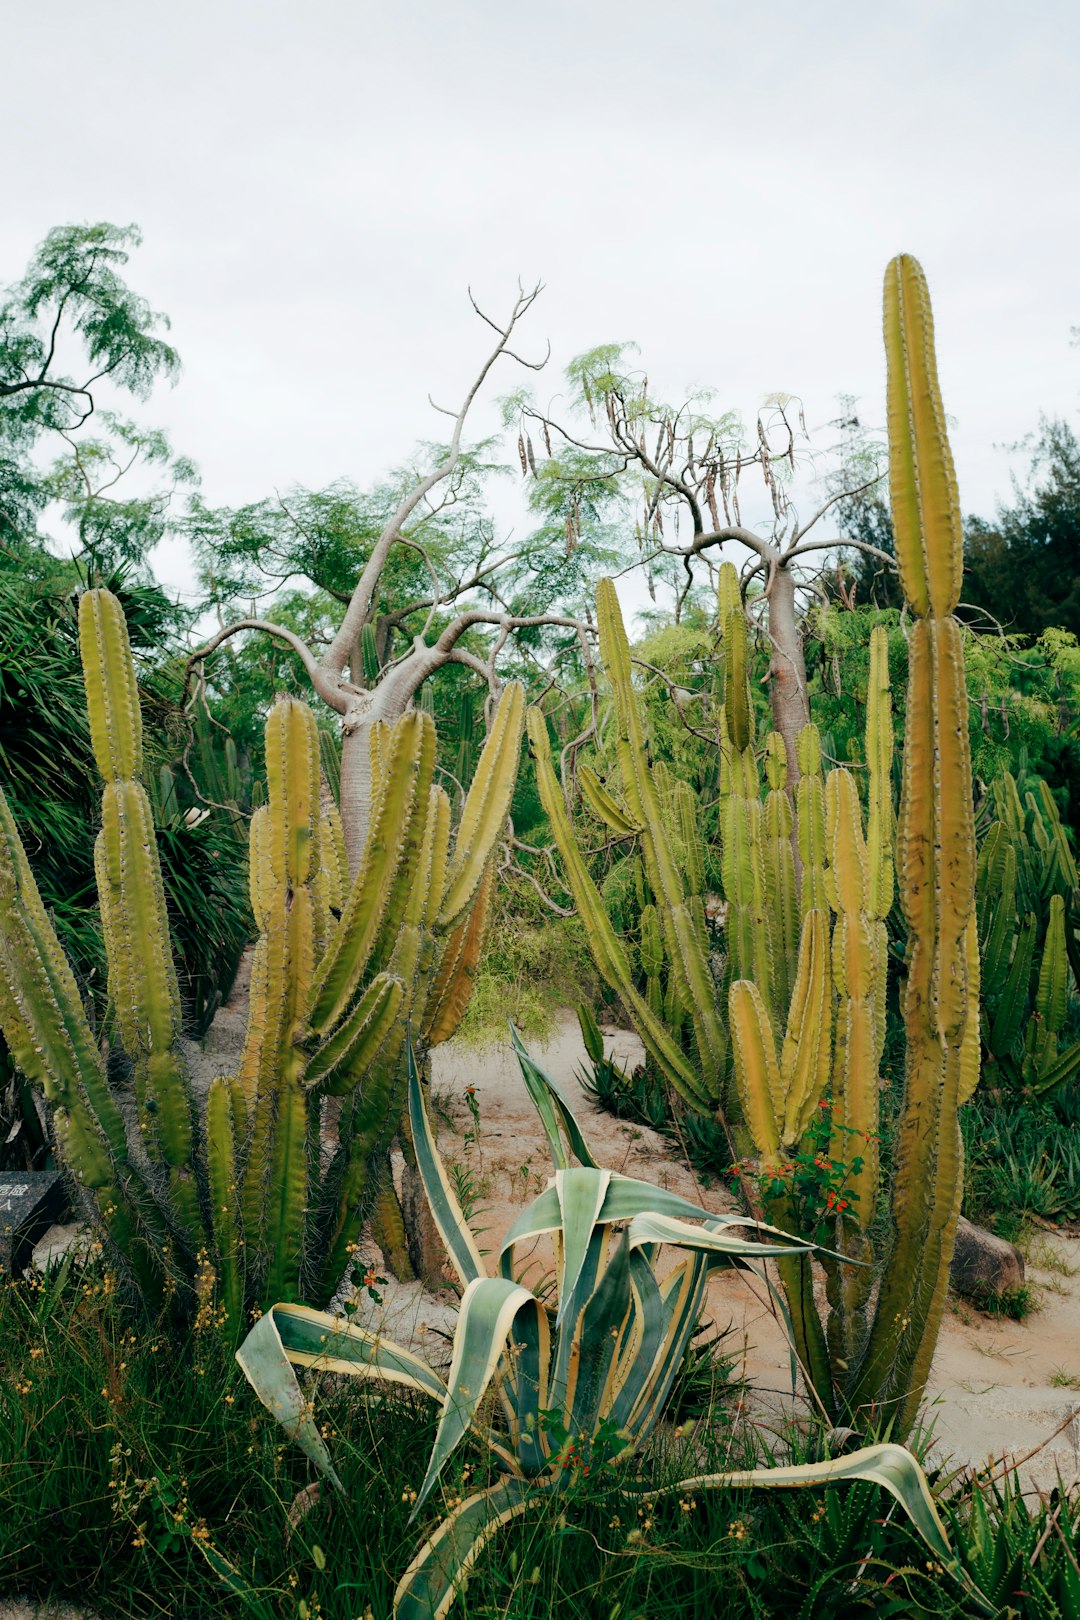 green cactus plants under white sky during daytime